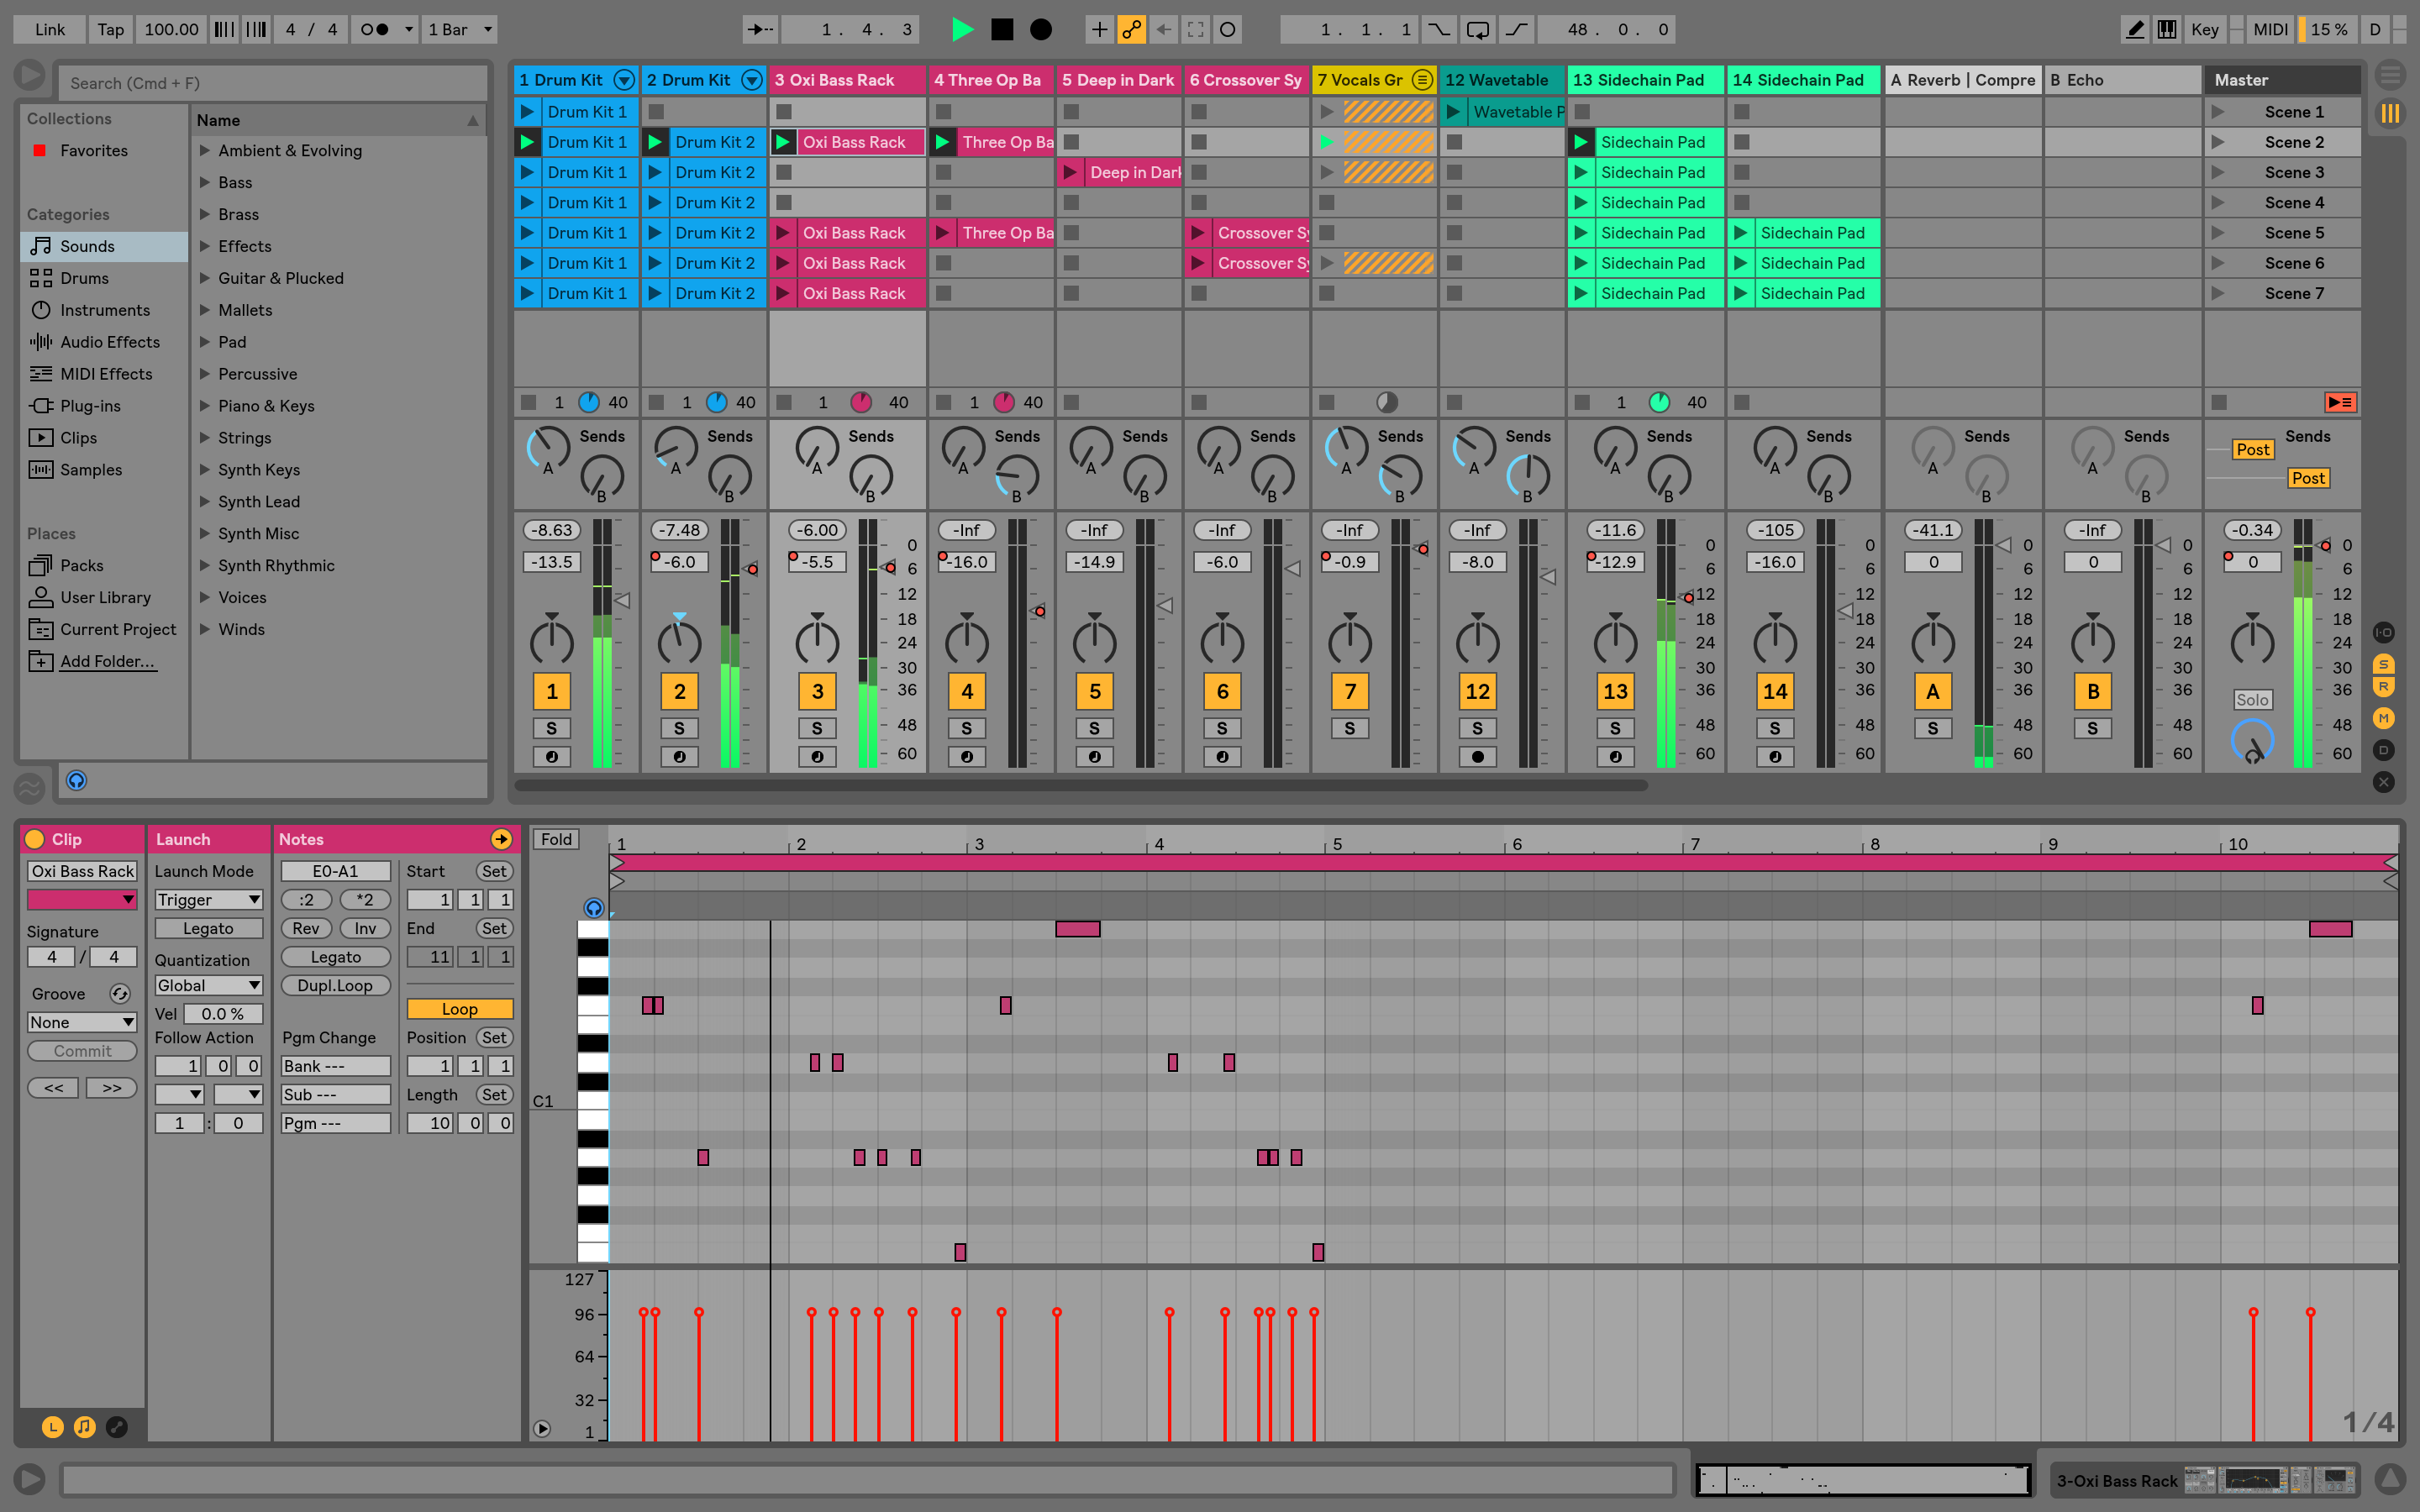 ableton-mixing-software-free-download-vitaminpotent